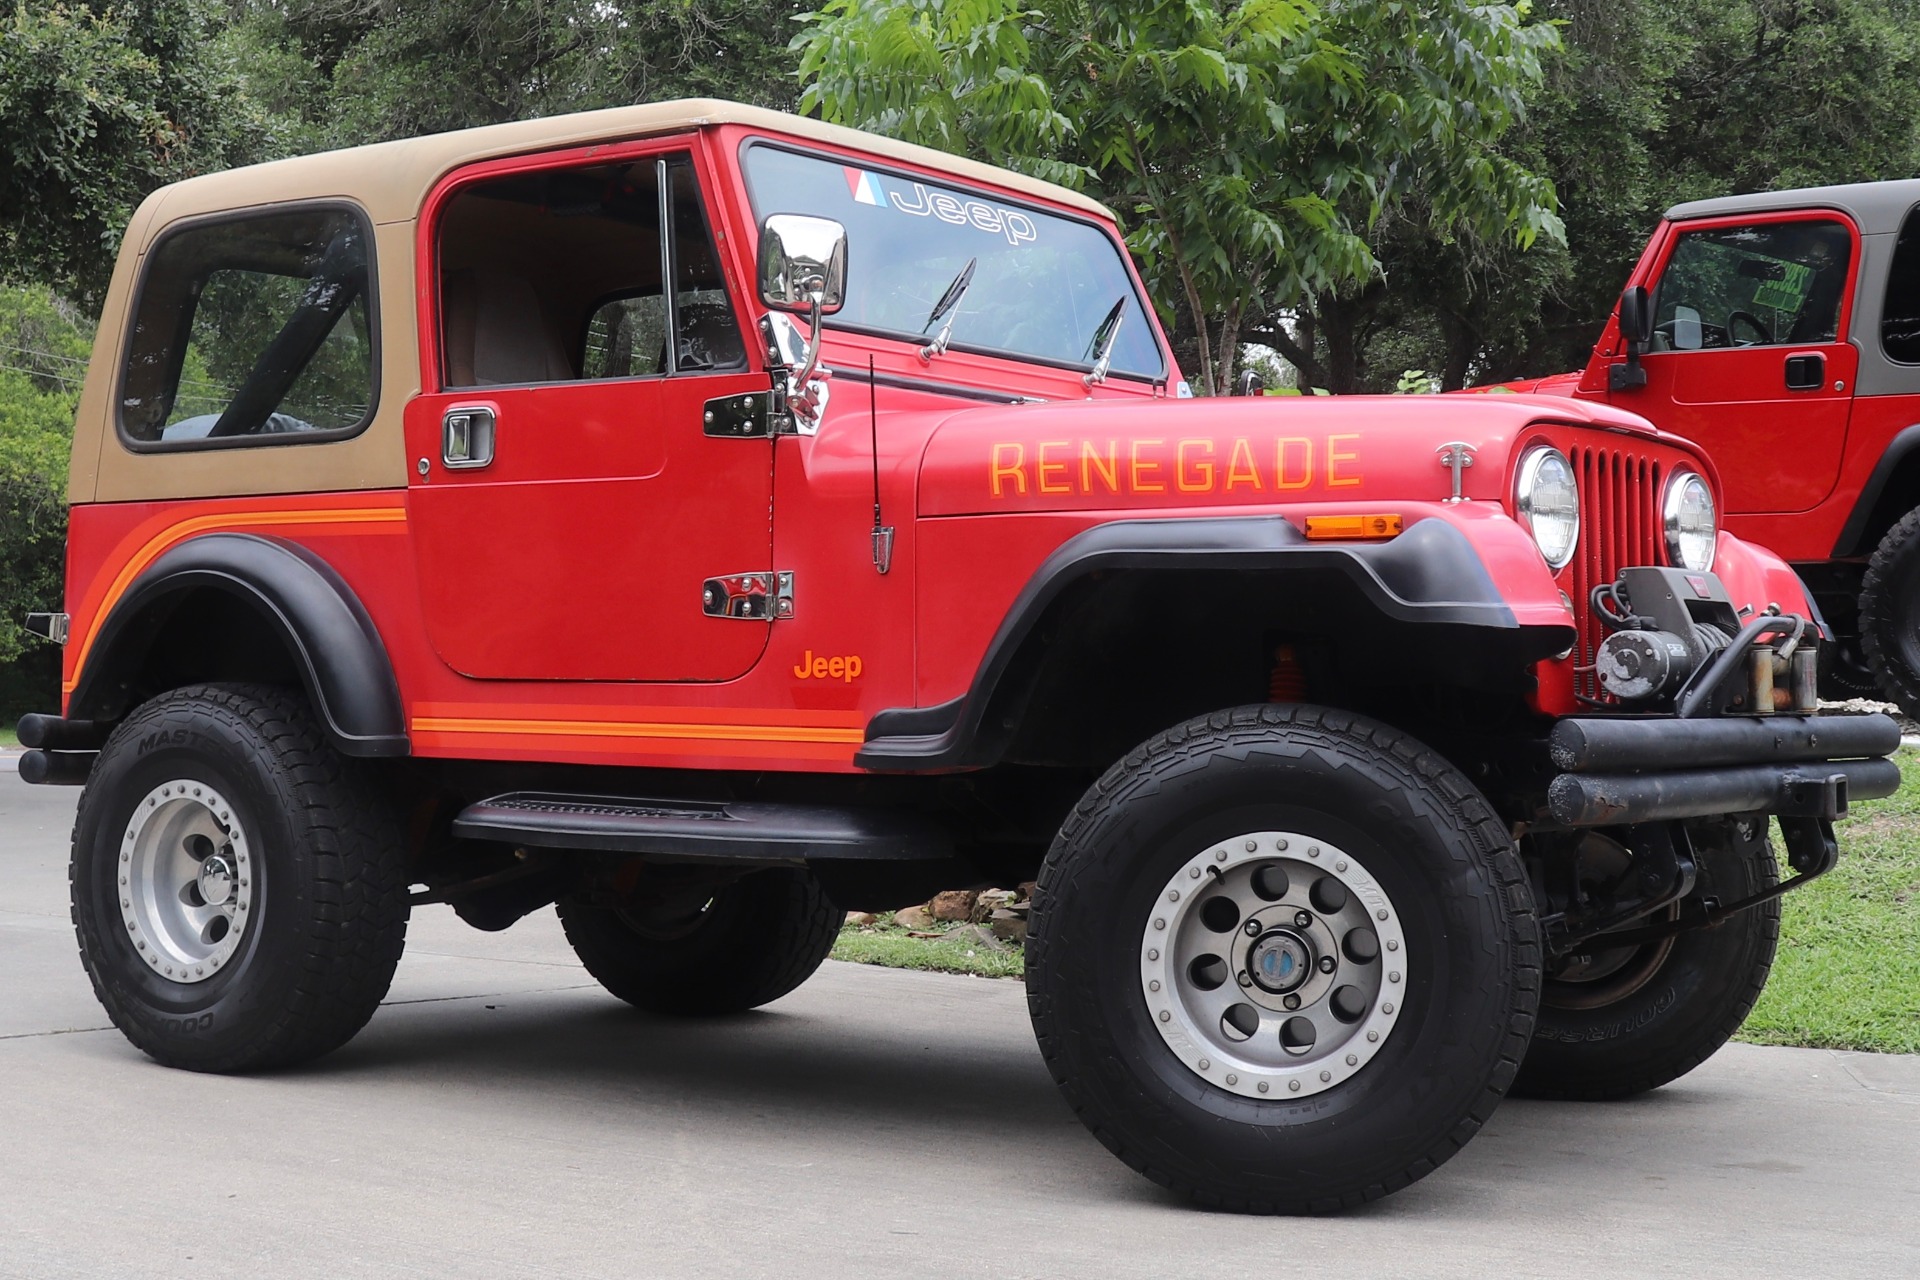 Used 1984 Jeep CJ-7 Renegade For Sale ($14,995) | Select Jeeps Inc. Stock  #010194